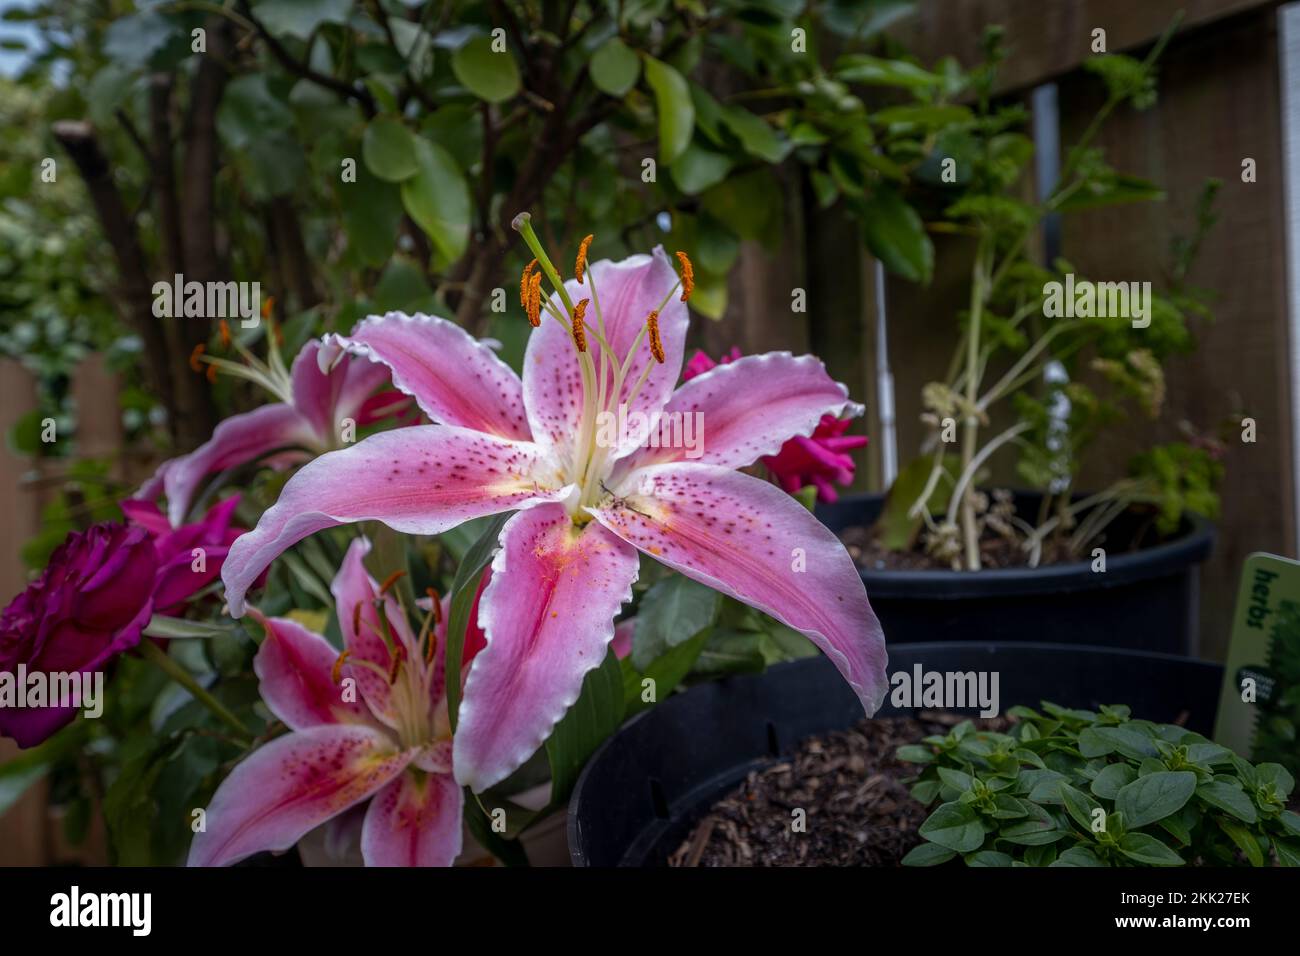 A closeup of a pink lily flowers (Lilium speciosum) growing in a pot in a green garden Stock Photo